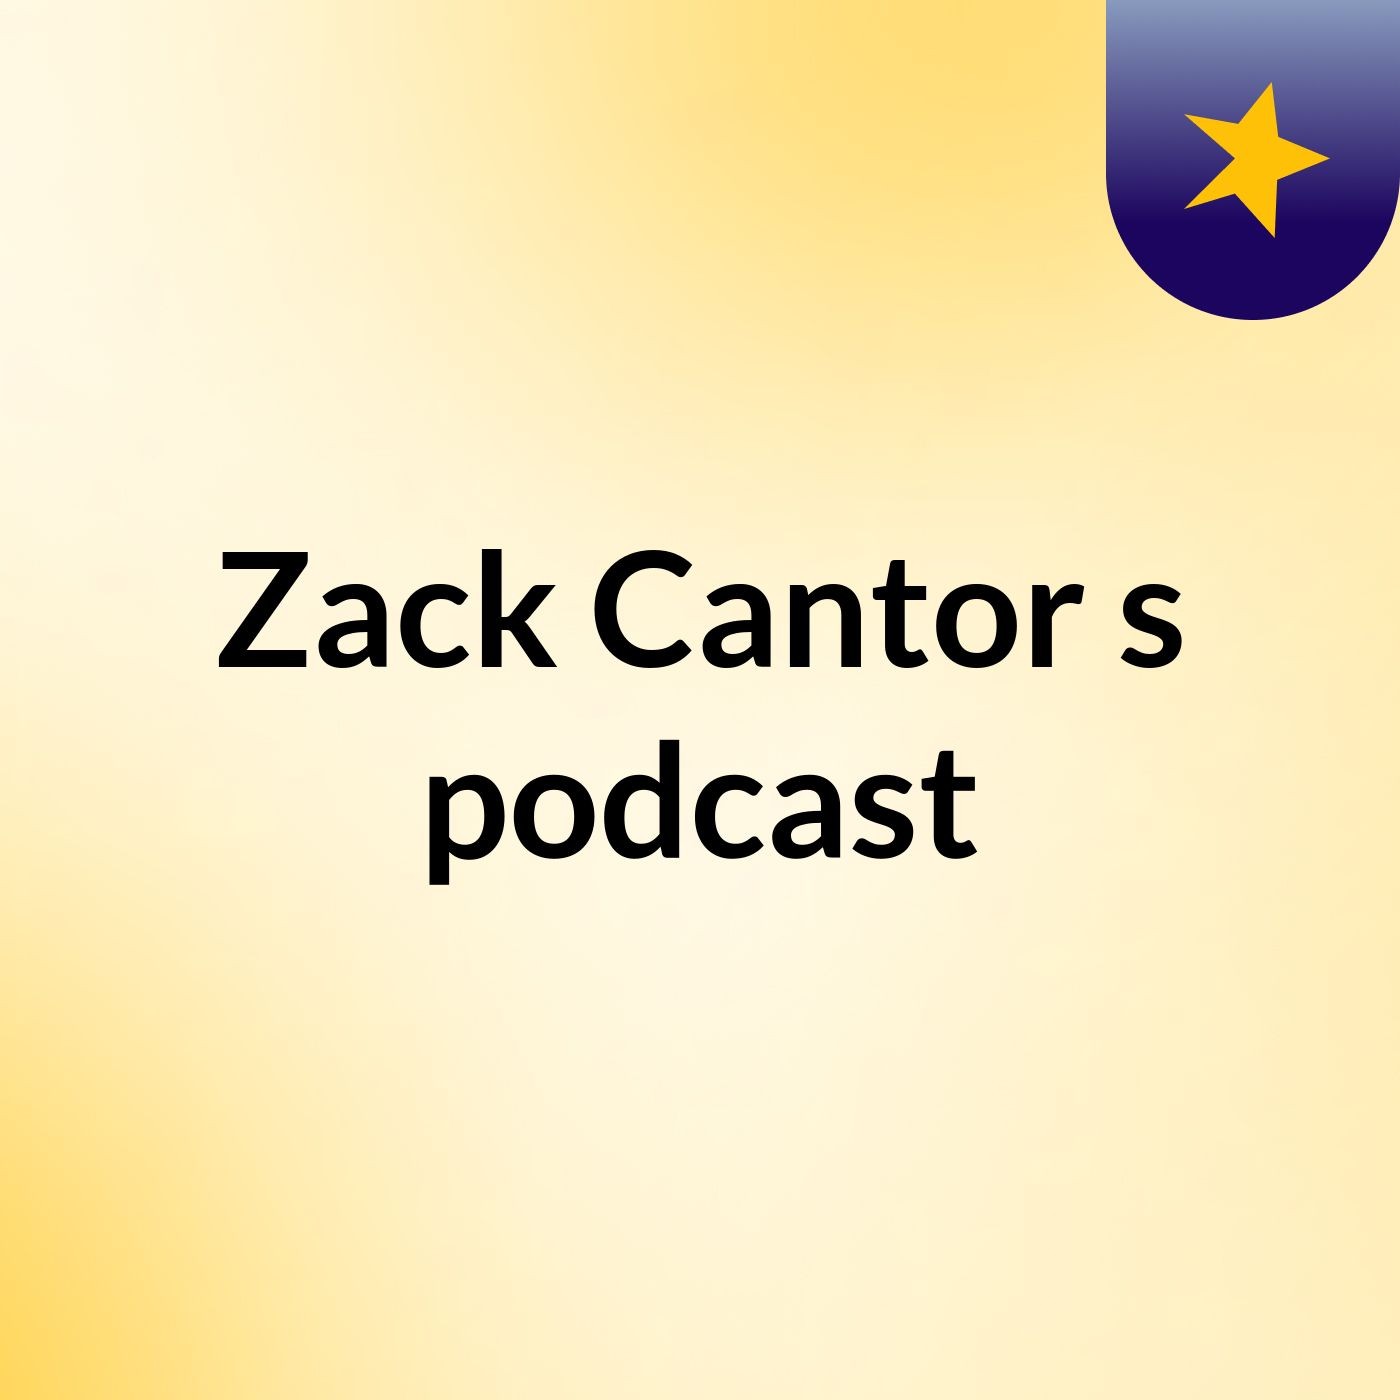 Zack Cantor's podcast